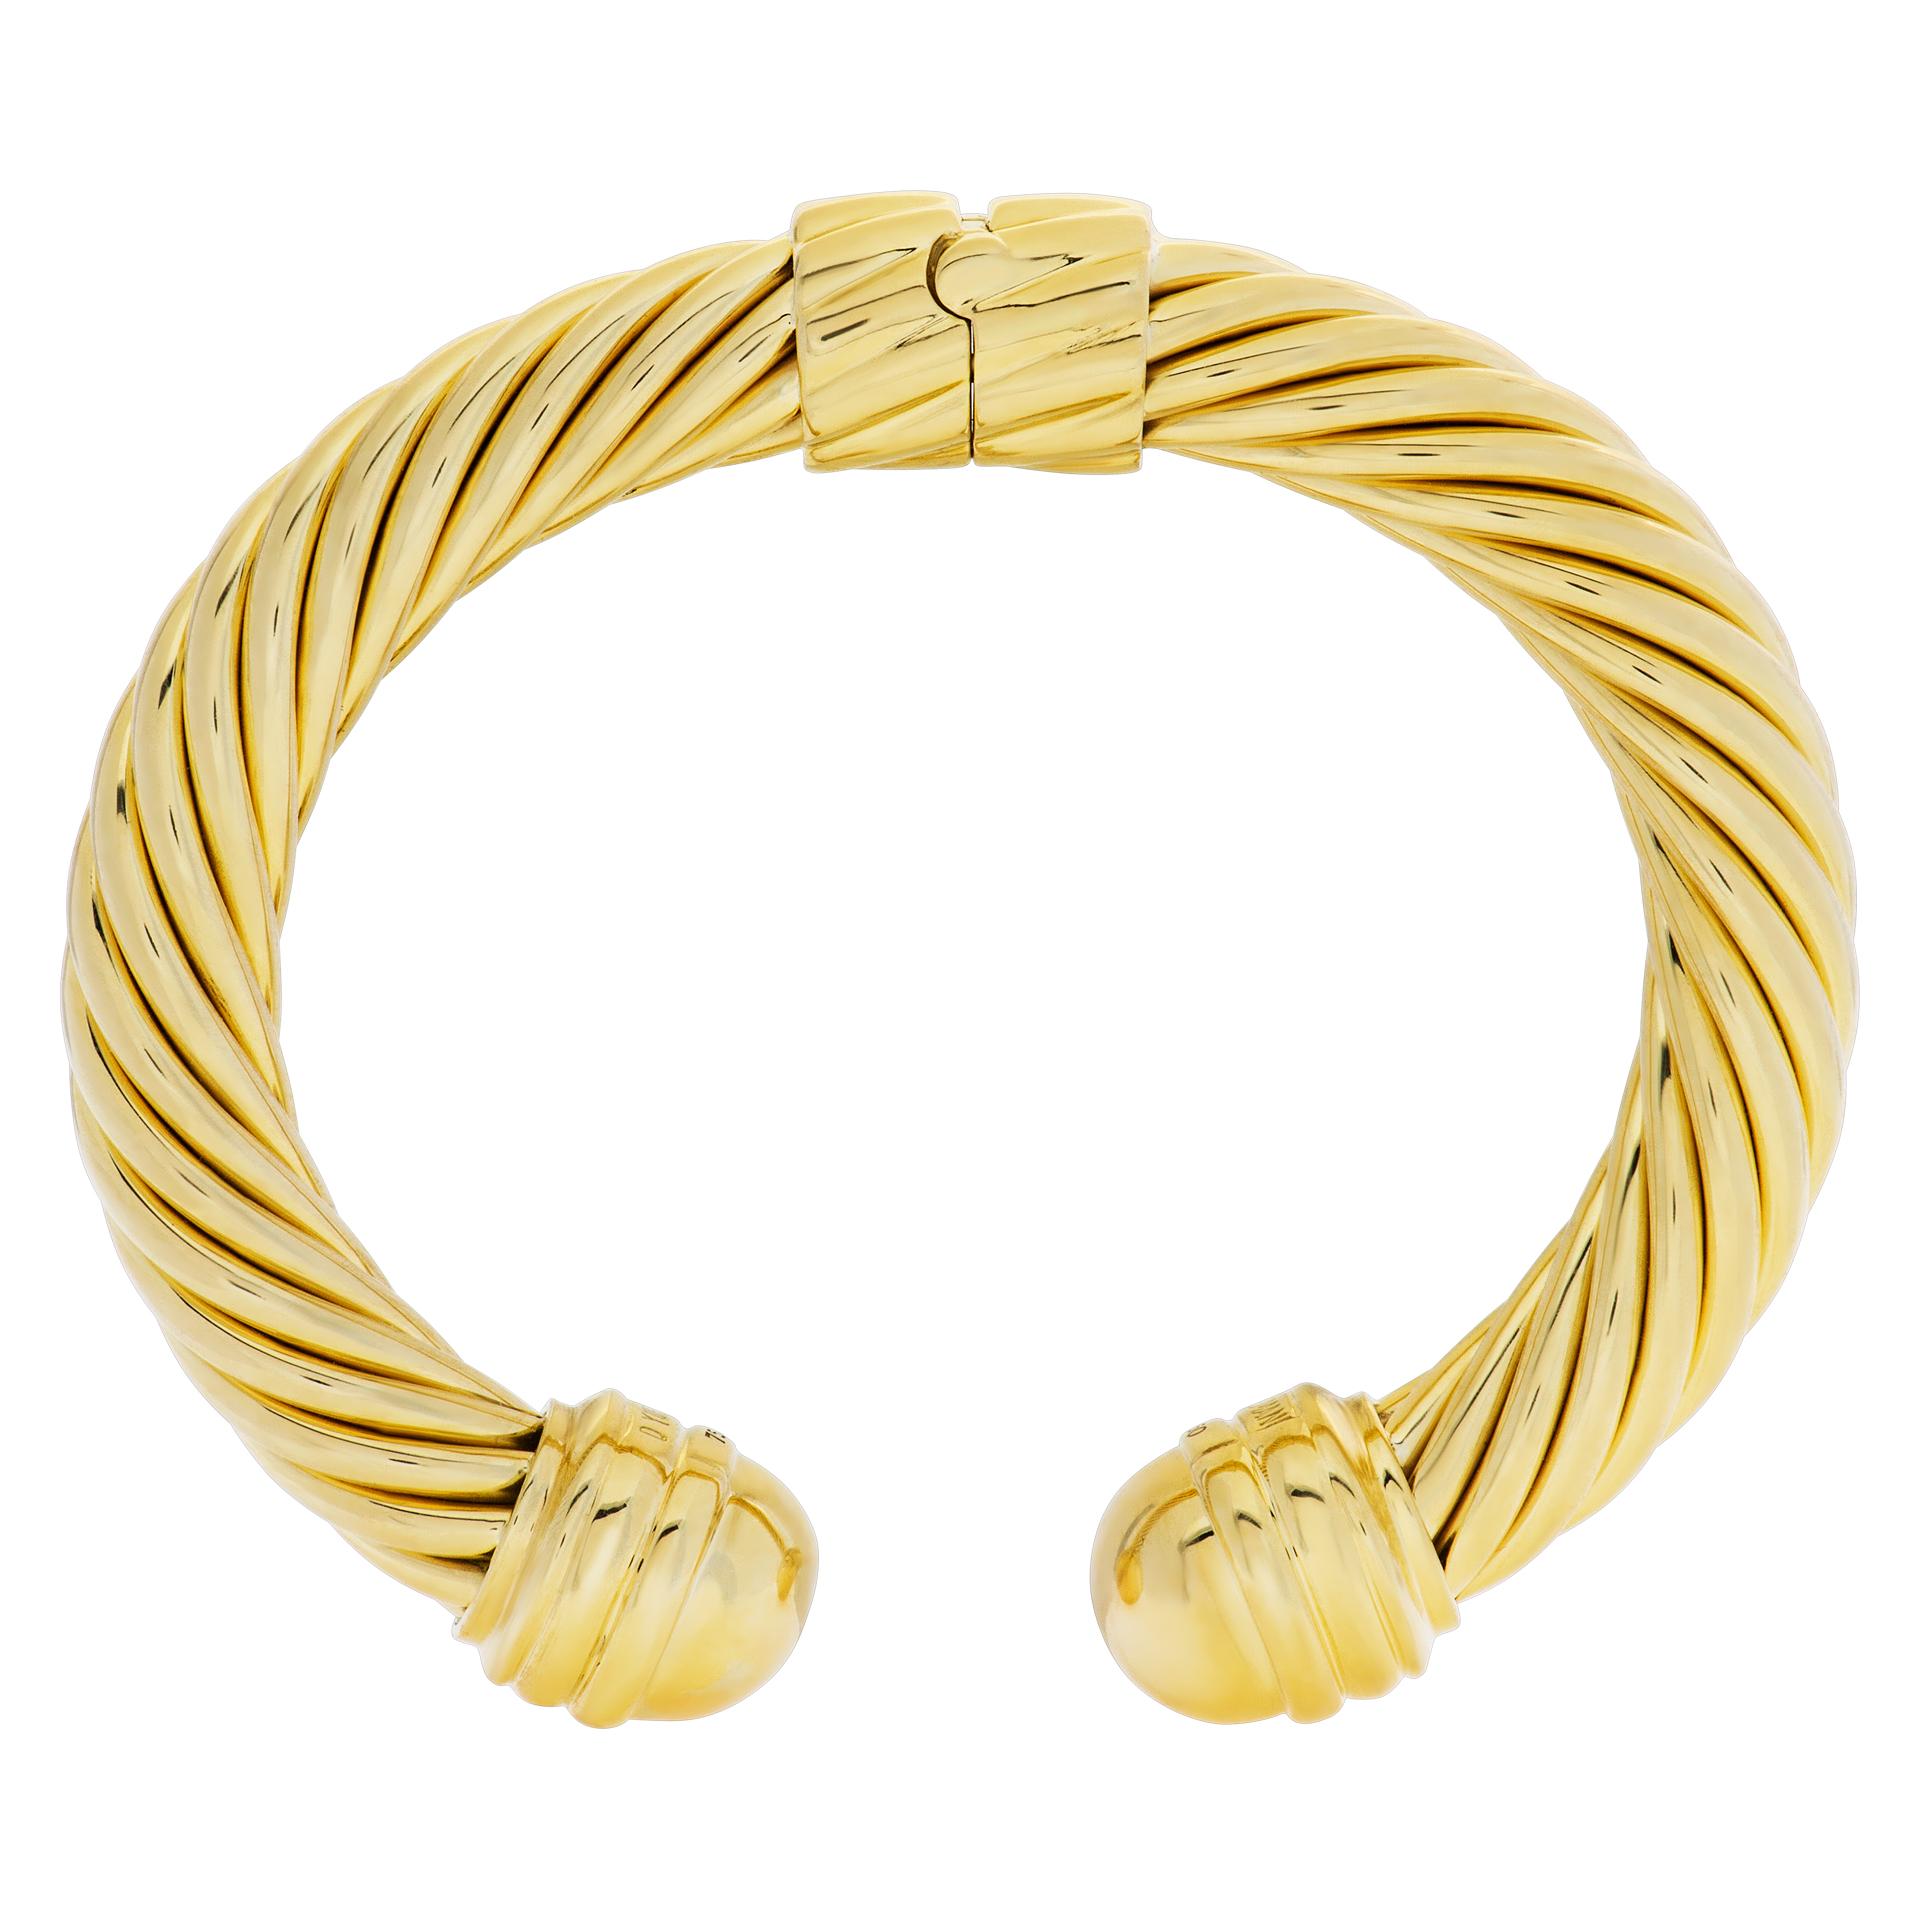 ESTIMATED RETAIL $10400 - YOUR PRICE $8320 - 100% AUTHENTIC  David Yurman Thoroughbred Cable Classics bangle bracelet in 18k. Fits 6.5 - 6.75 wrist size.